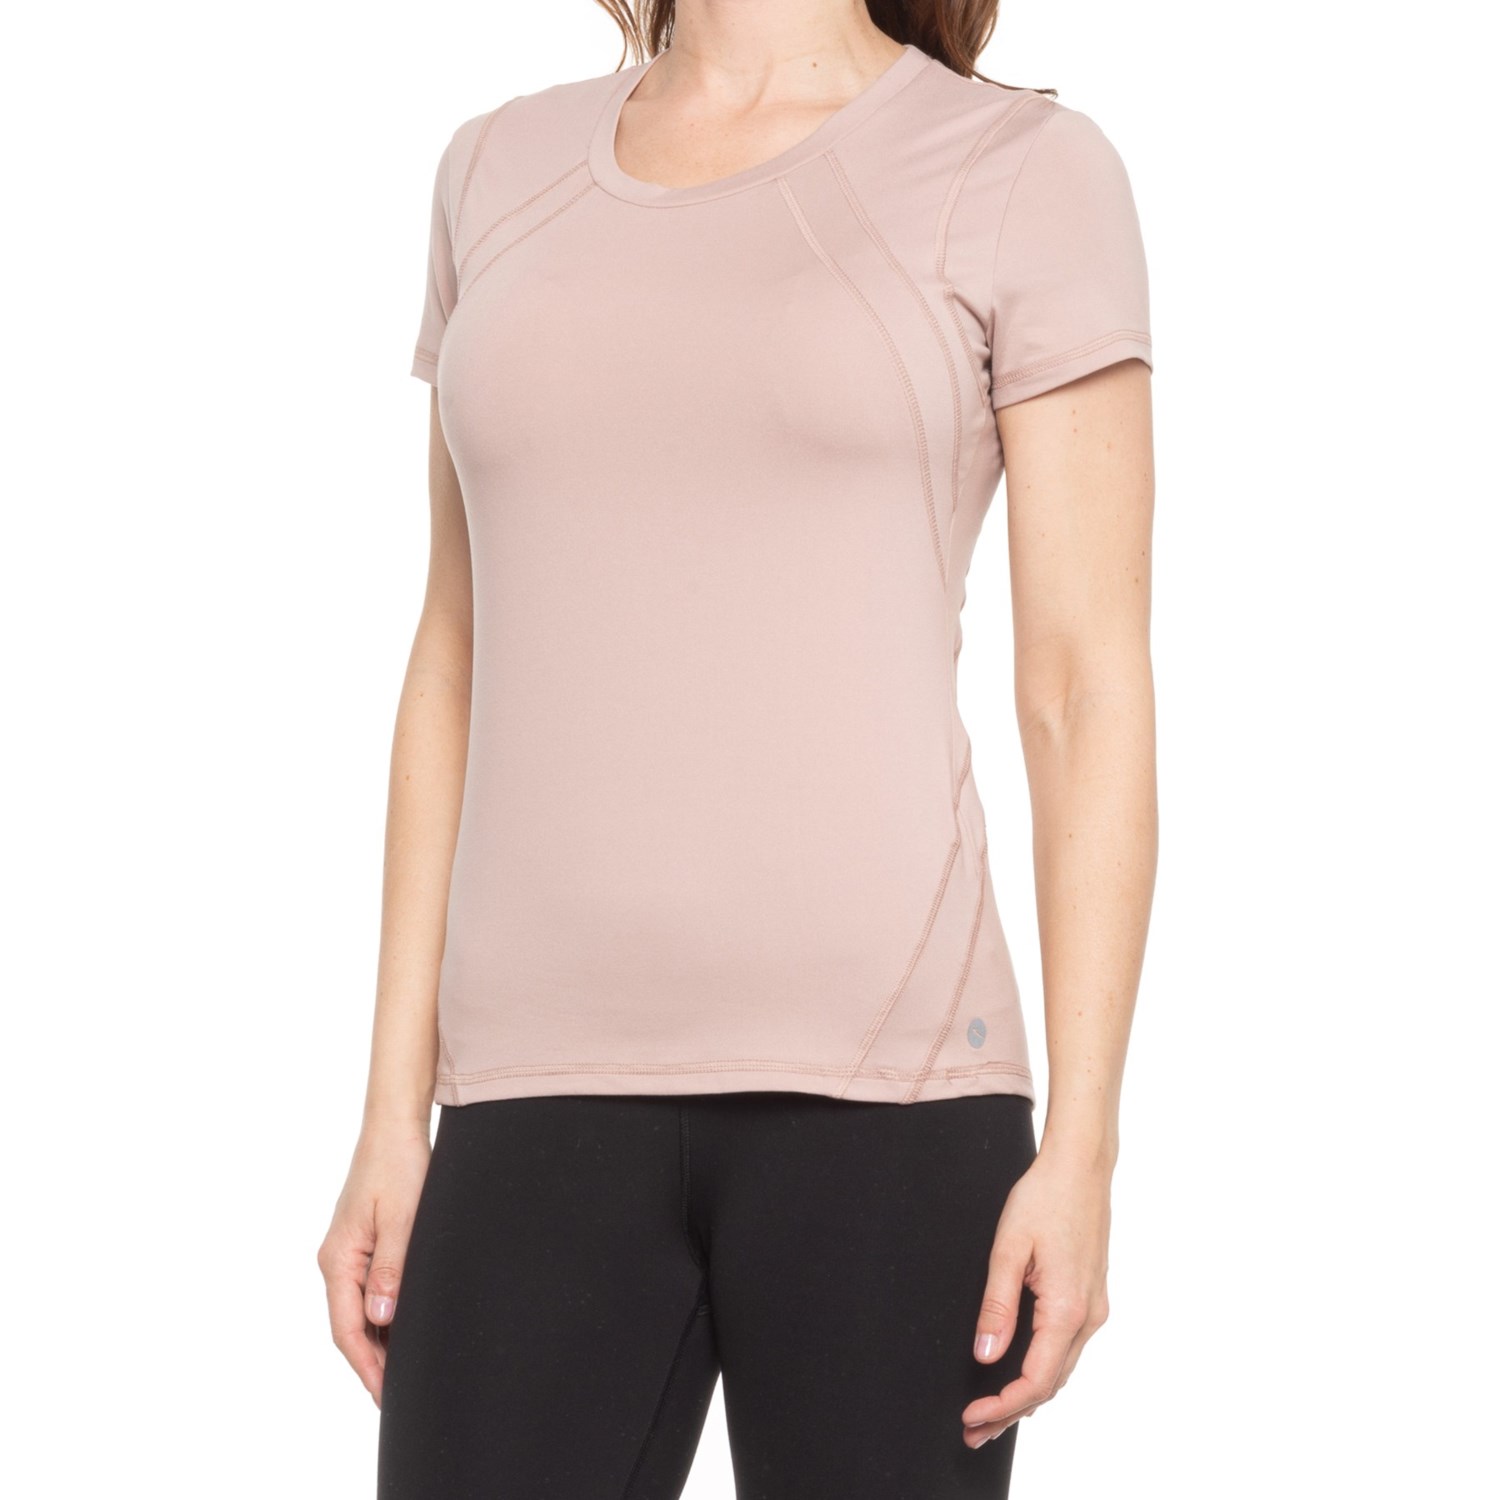 Gottex Rounded Seam T-Shirt (For Women) - Save 70%